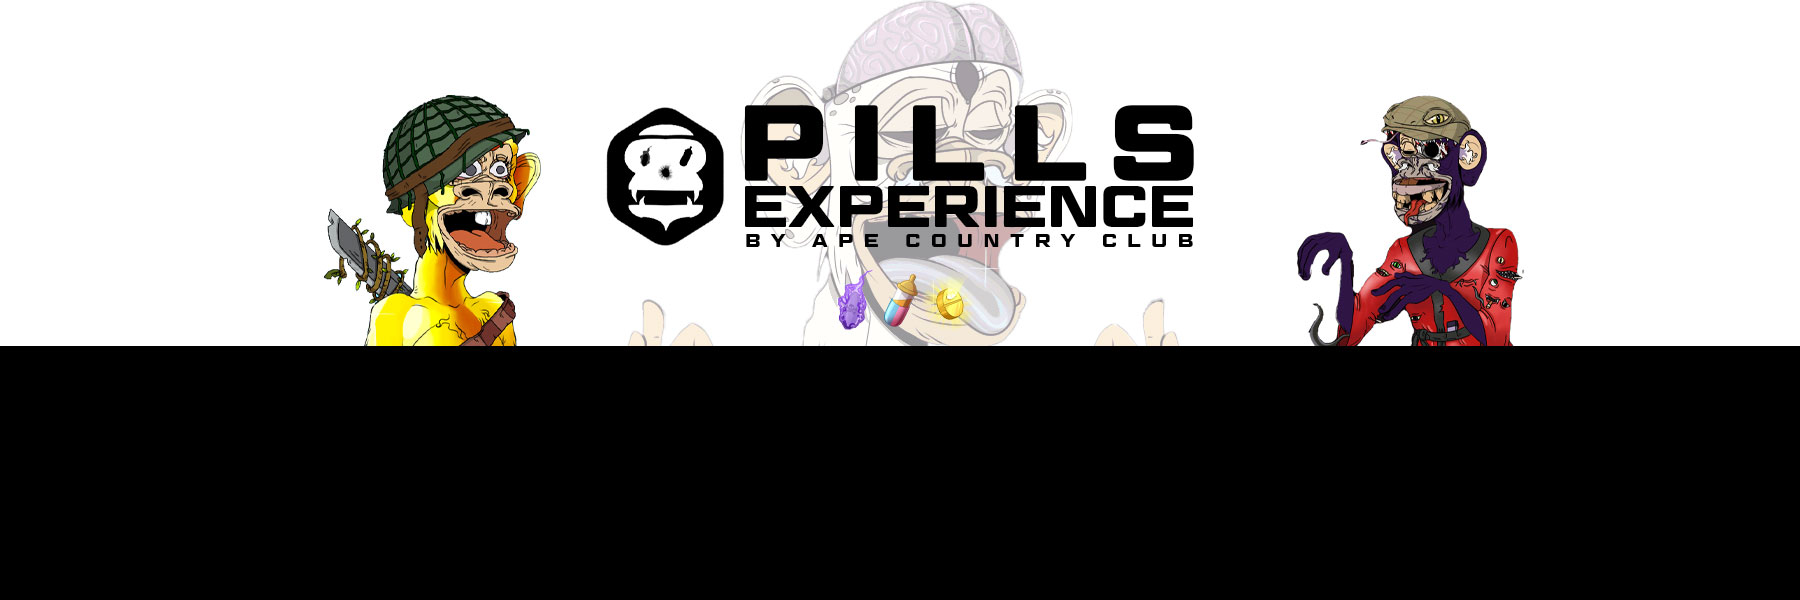 Pills Experience by Ape Country Club